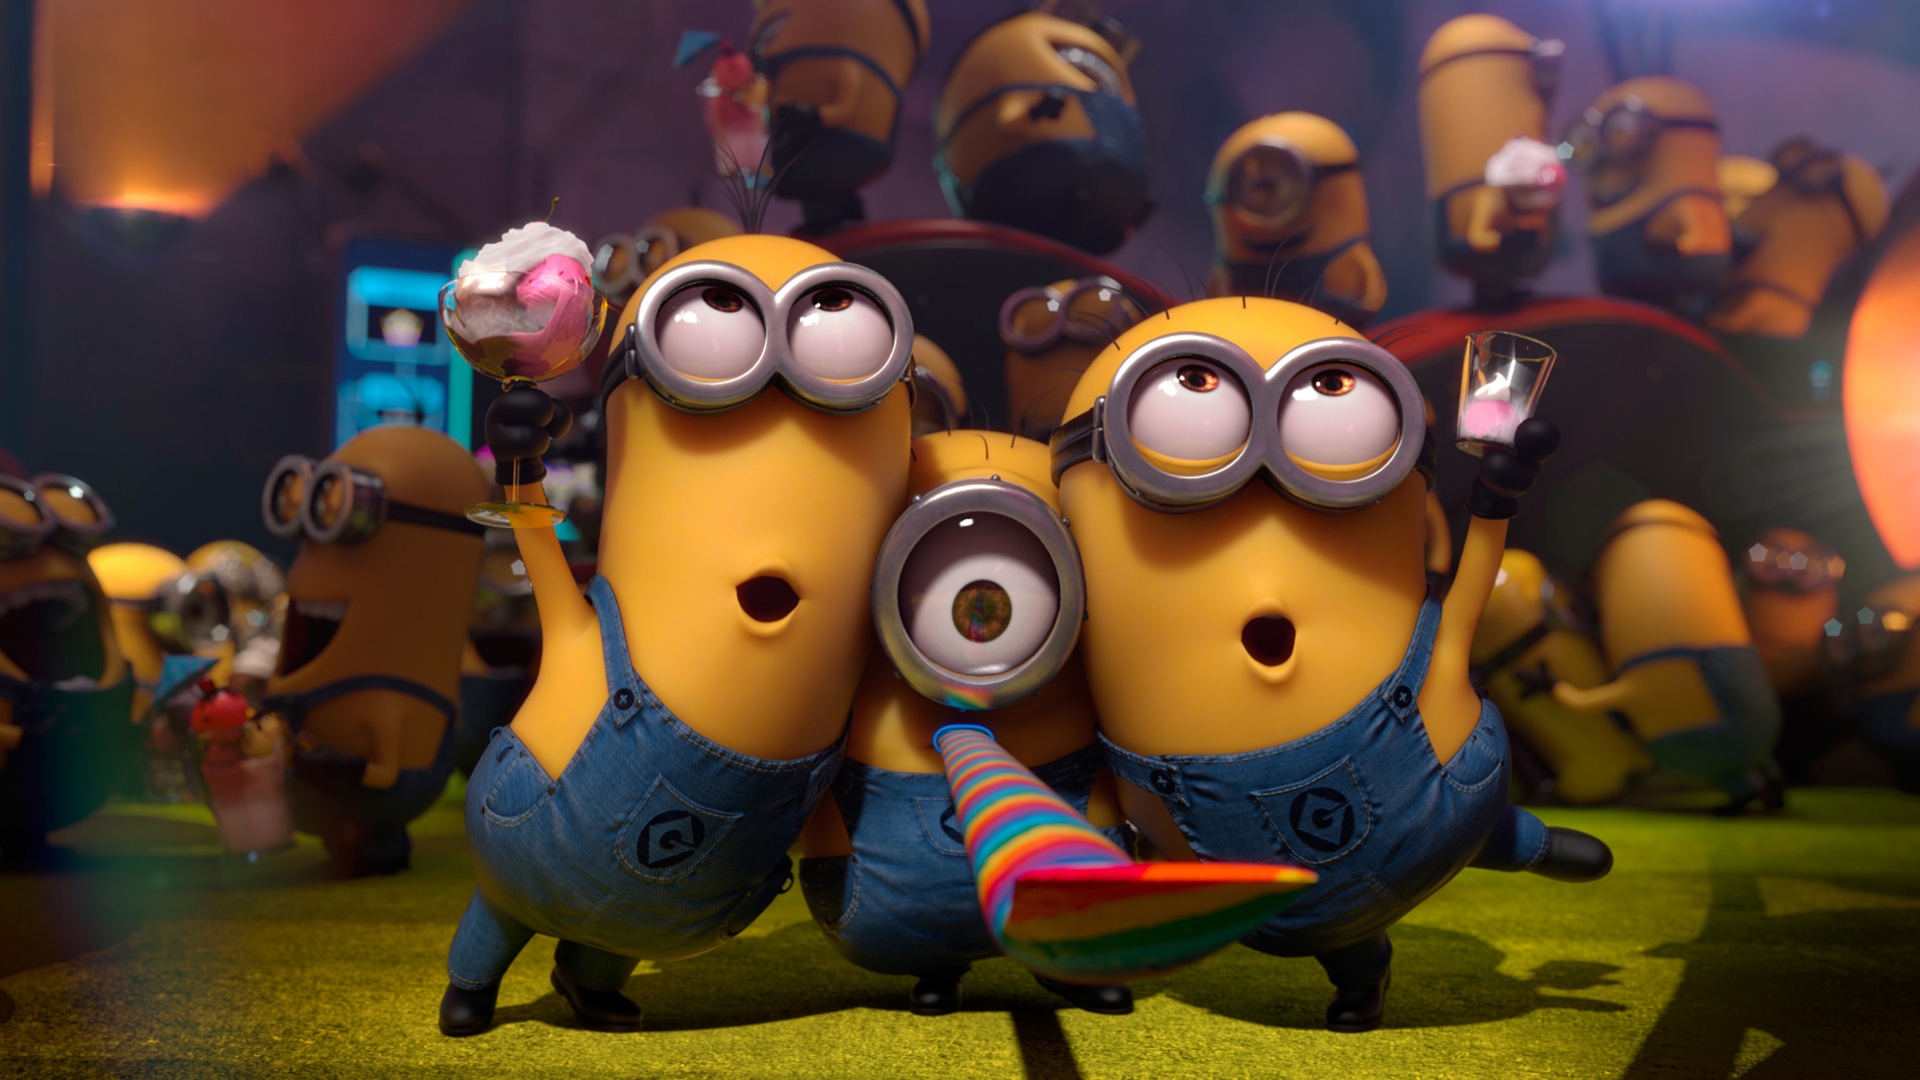 Download Minions Party Wallpaper in 1920x1080 Resolution 1920x1080